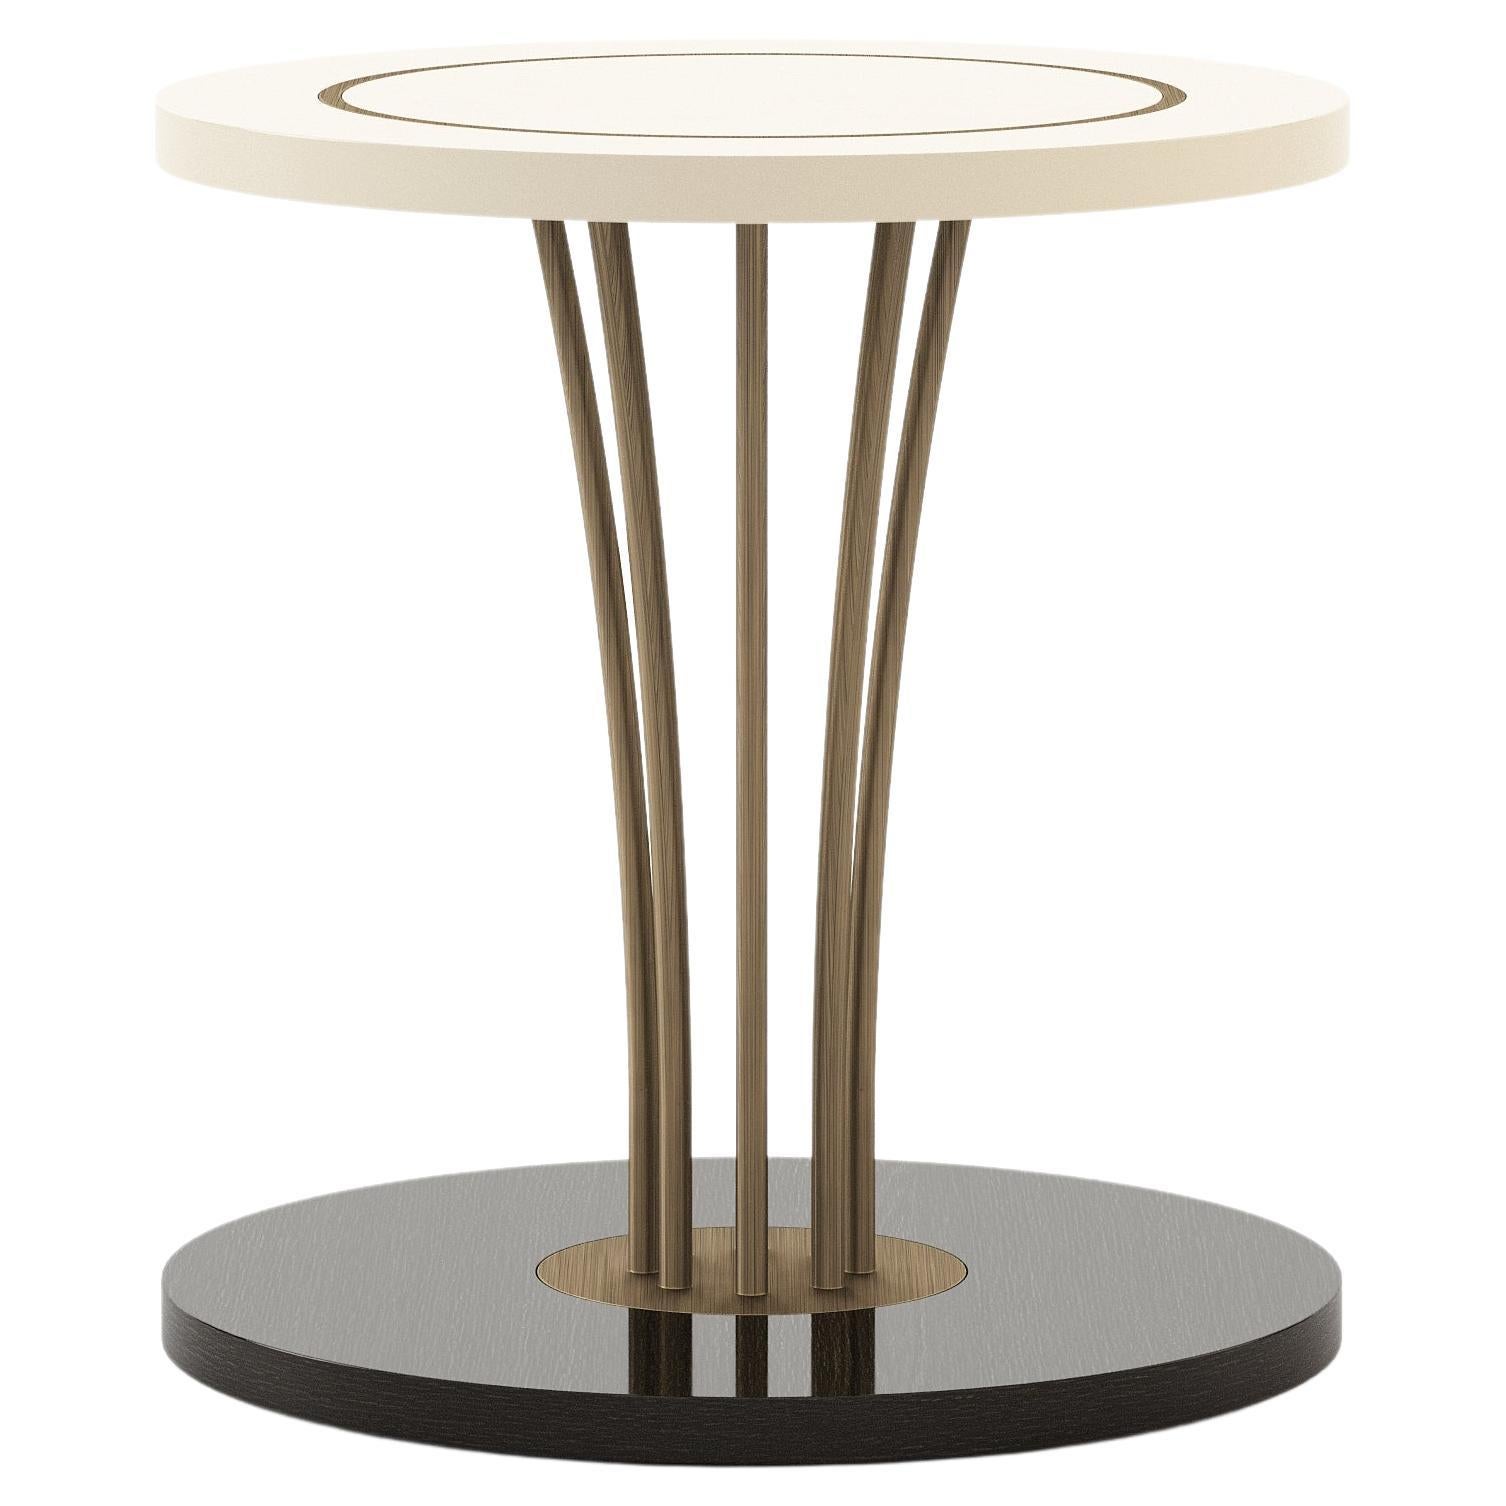 Art Deco style Sublime Side Table made with brass and lacquer, Handmade